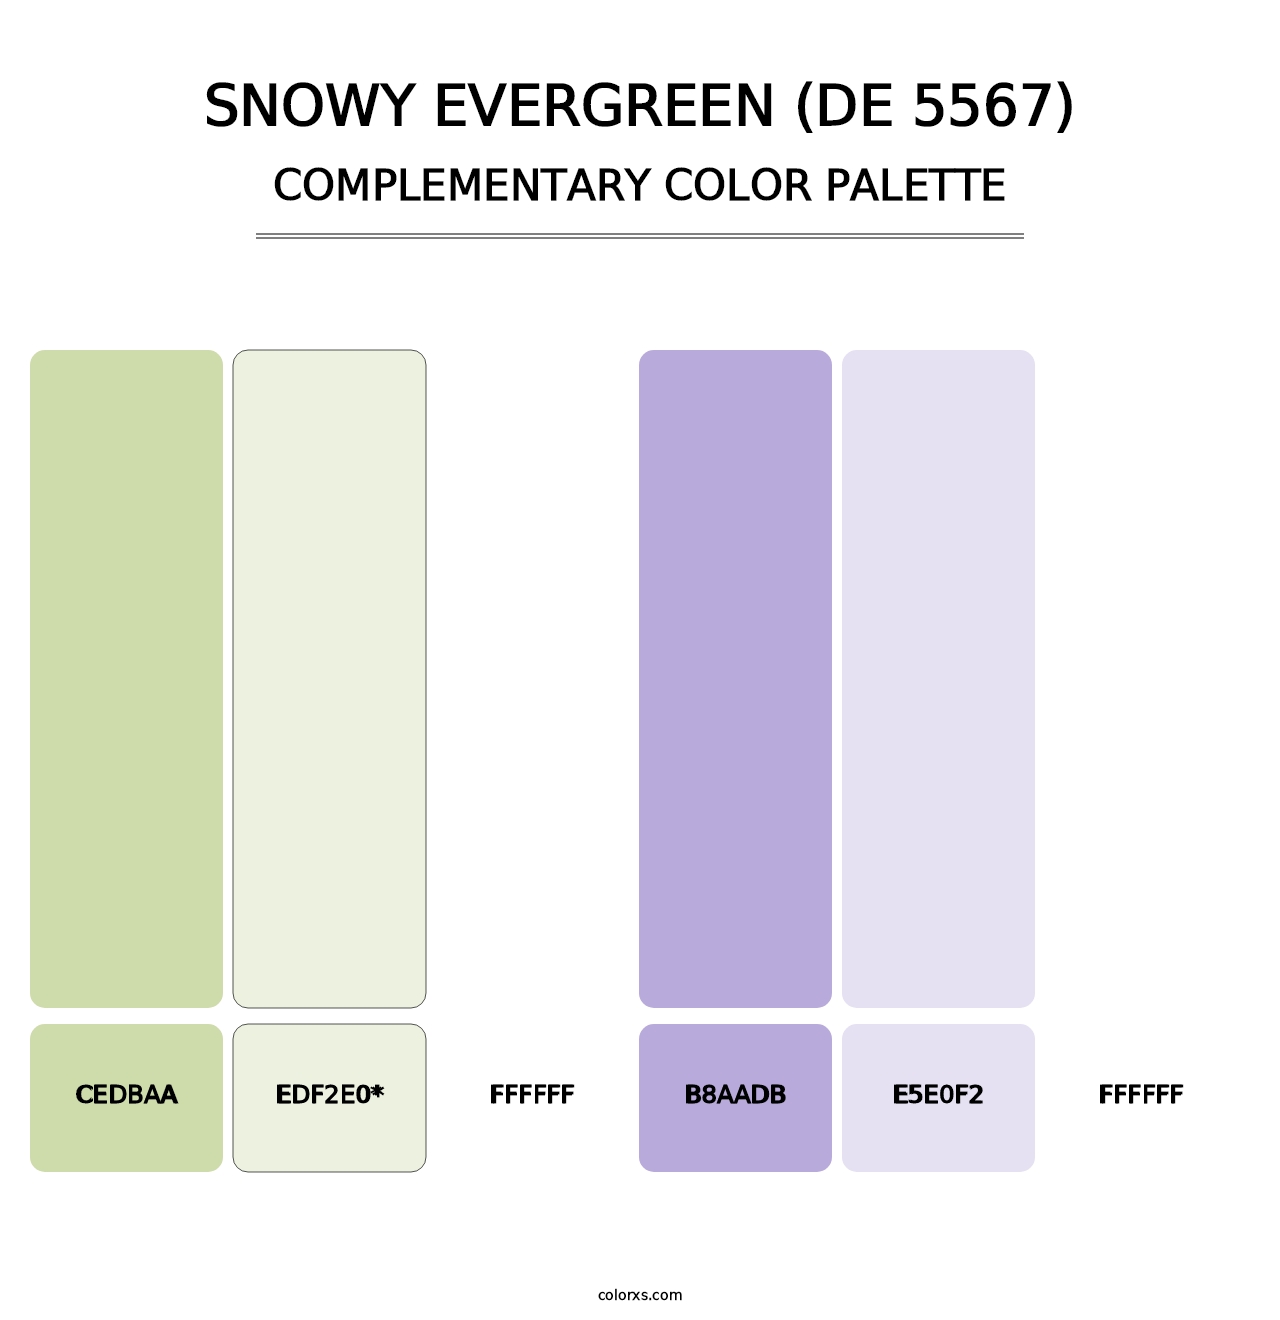 Snowy Evergreen (DE 5567) - Complementary Color Palette